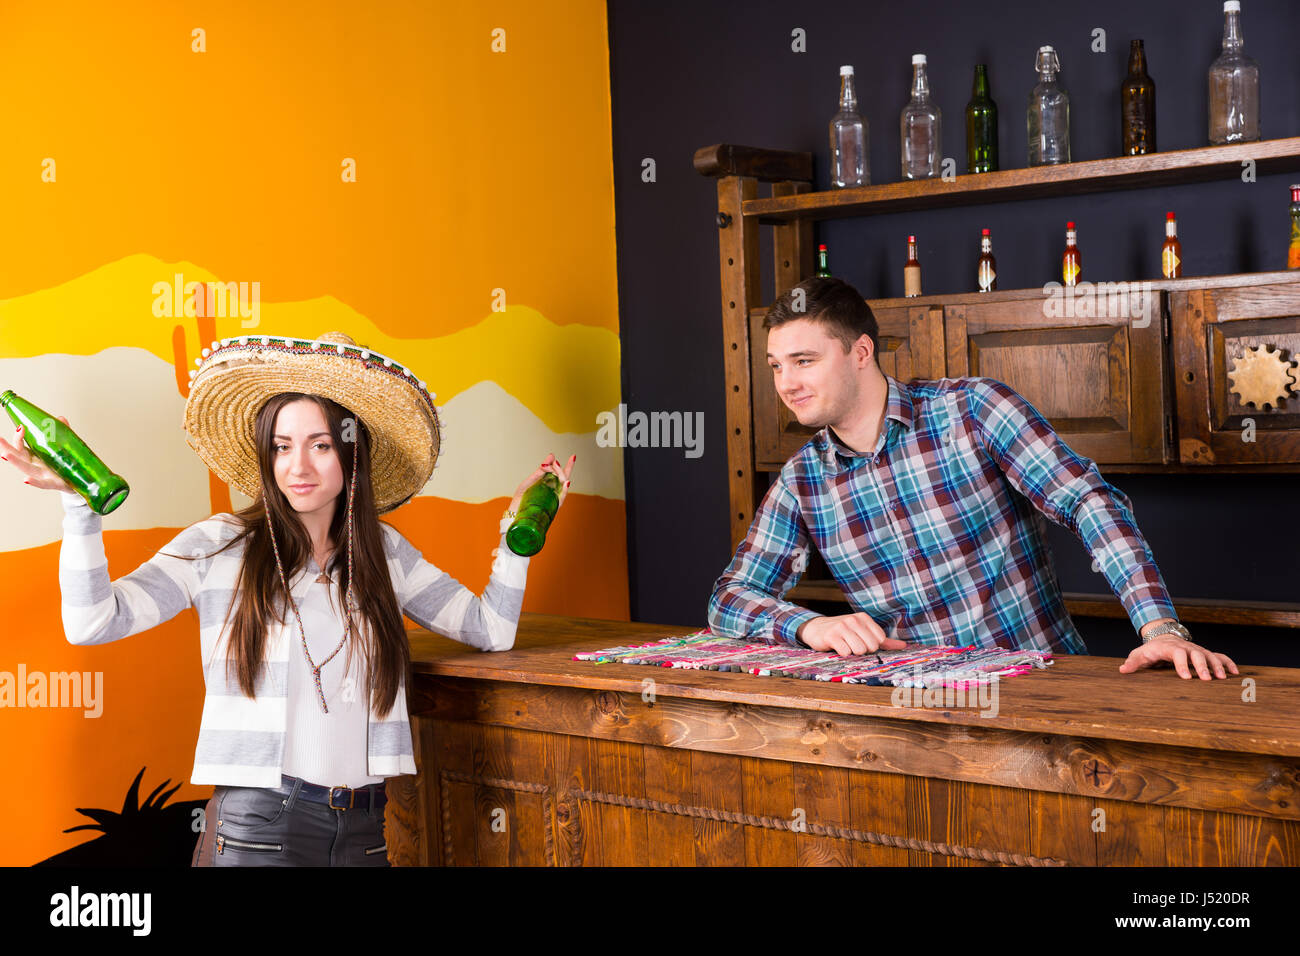 A young woman in a sombrero holding two bottles of beer and standing at the bar next to the bartender in a plaid shirt in a Mexican bar Stock Photo